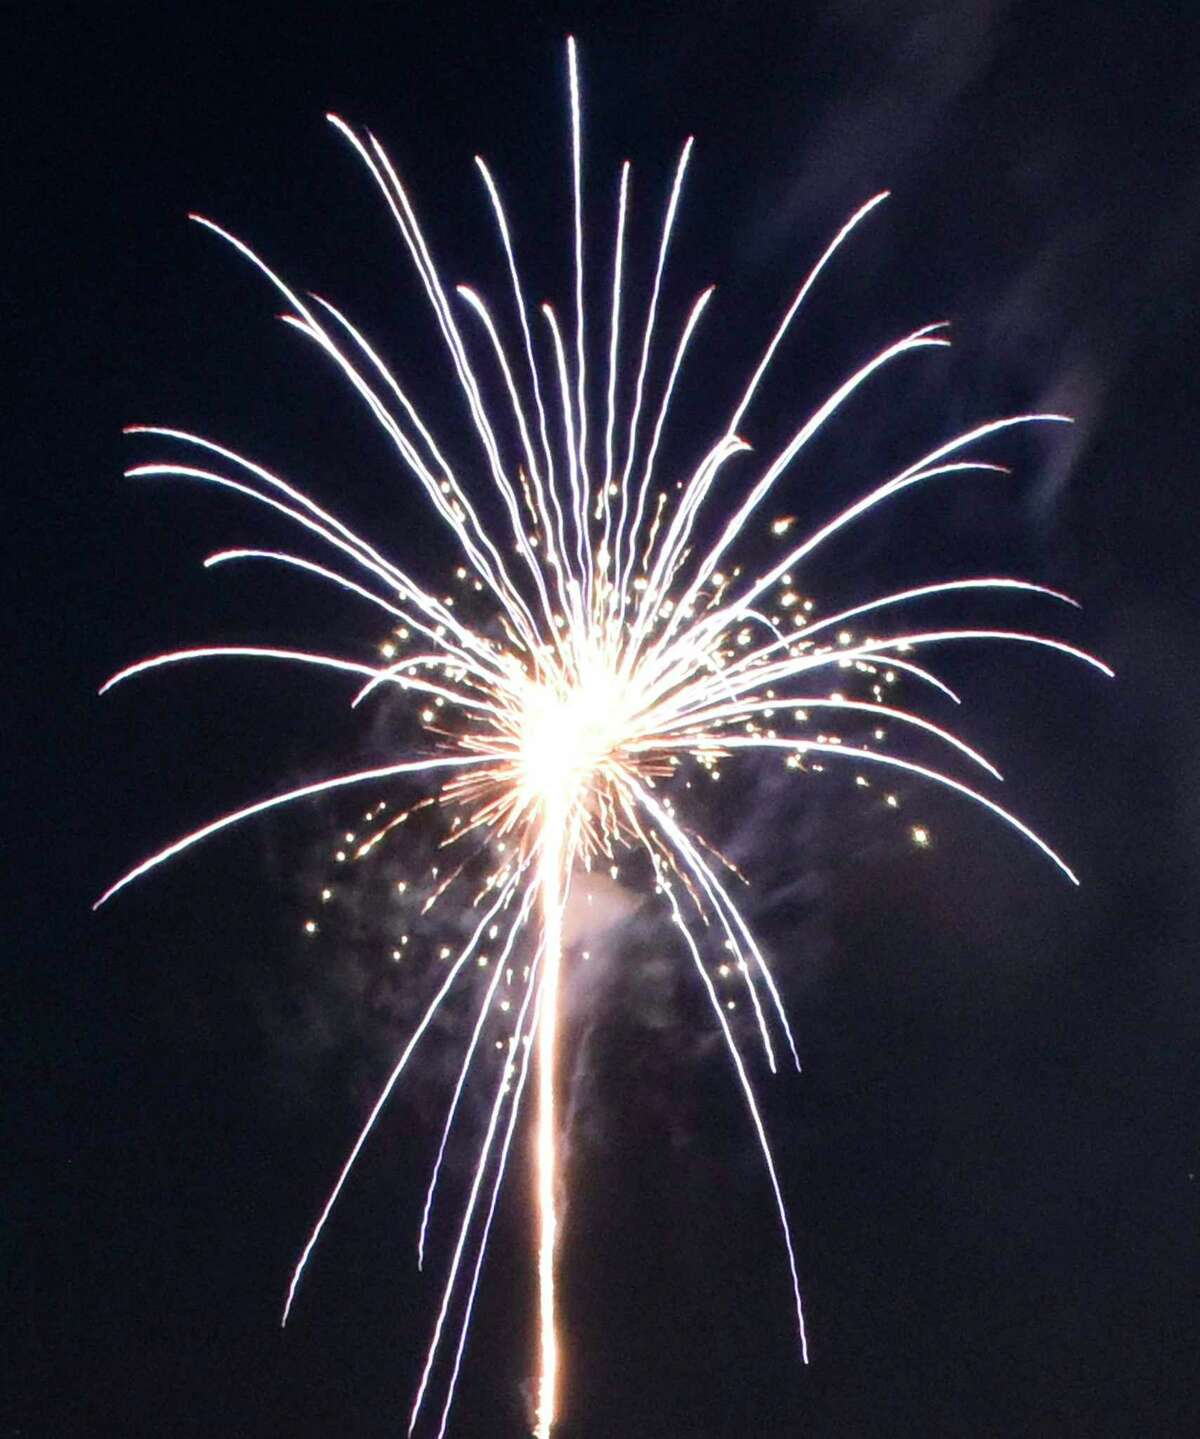 The town has canceled its planned July 4 fireworks show due to the potential for thunderstorms on Saturday. The town is instead looking at having a fireworks show on Labor Day weekend.